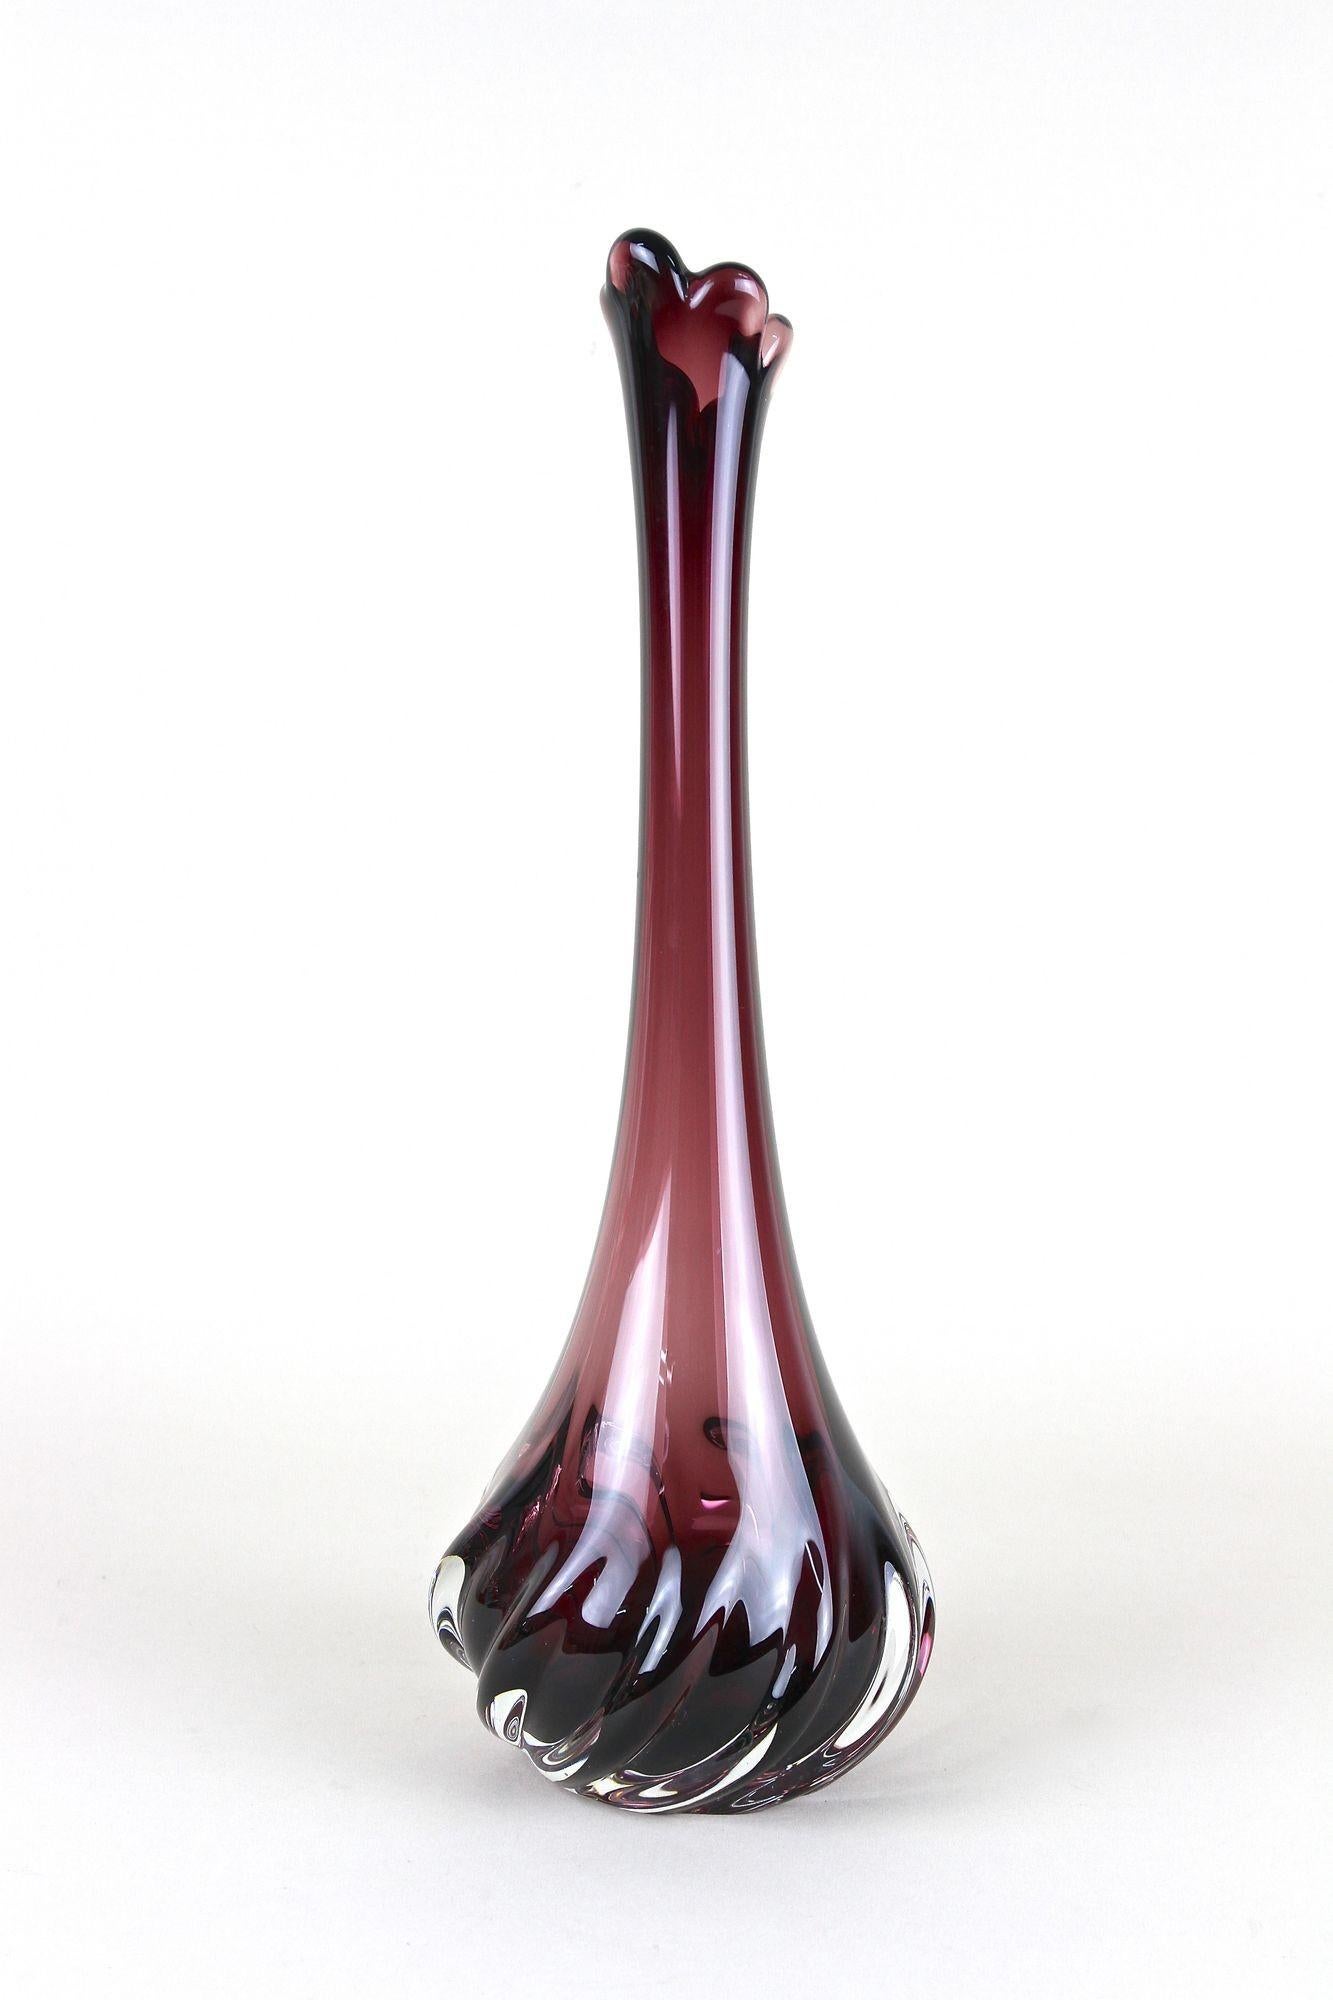 Bordeaux Red Murano Glass Long Neck Vase, 20th Century, Italy circa 1970 For Sale 1